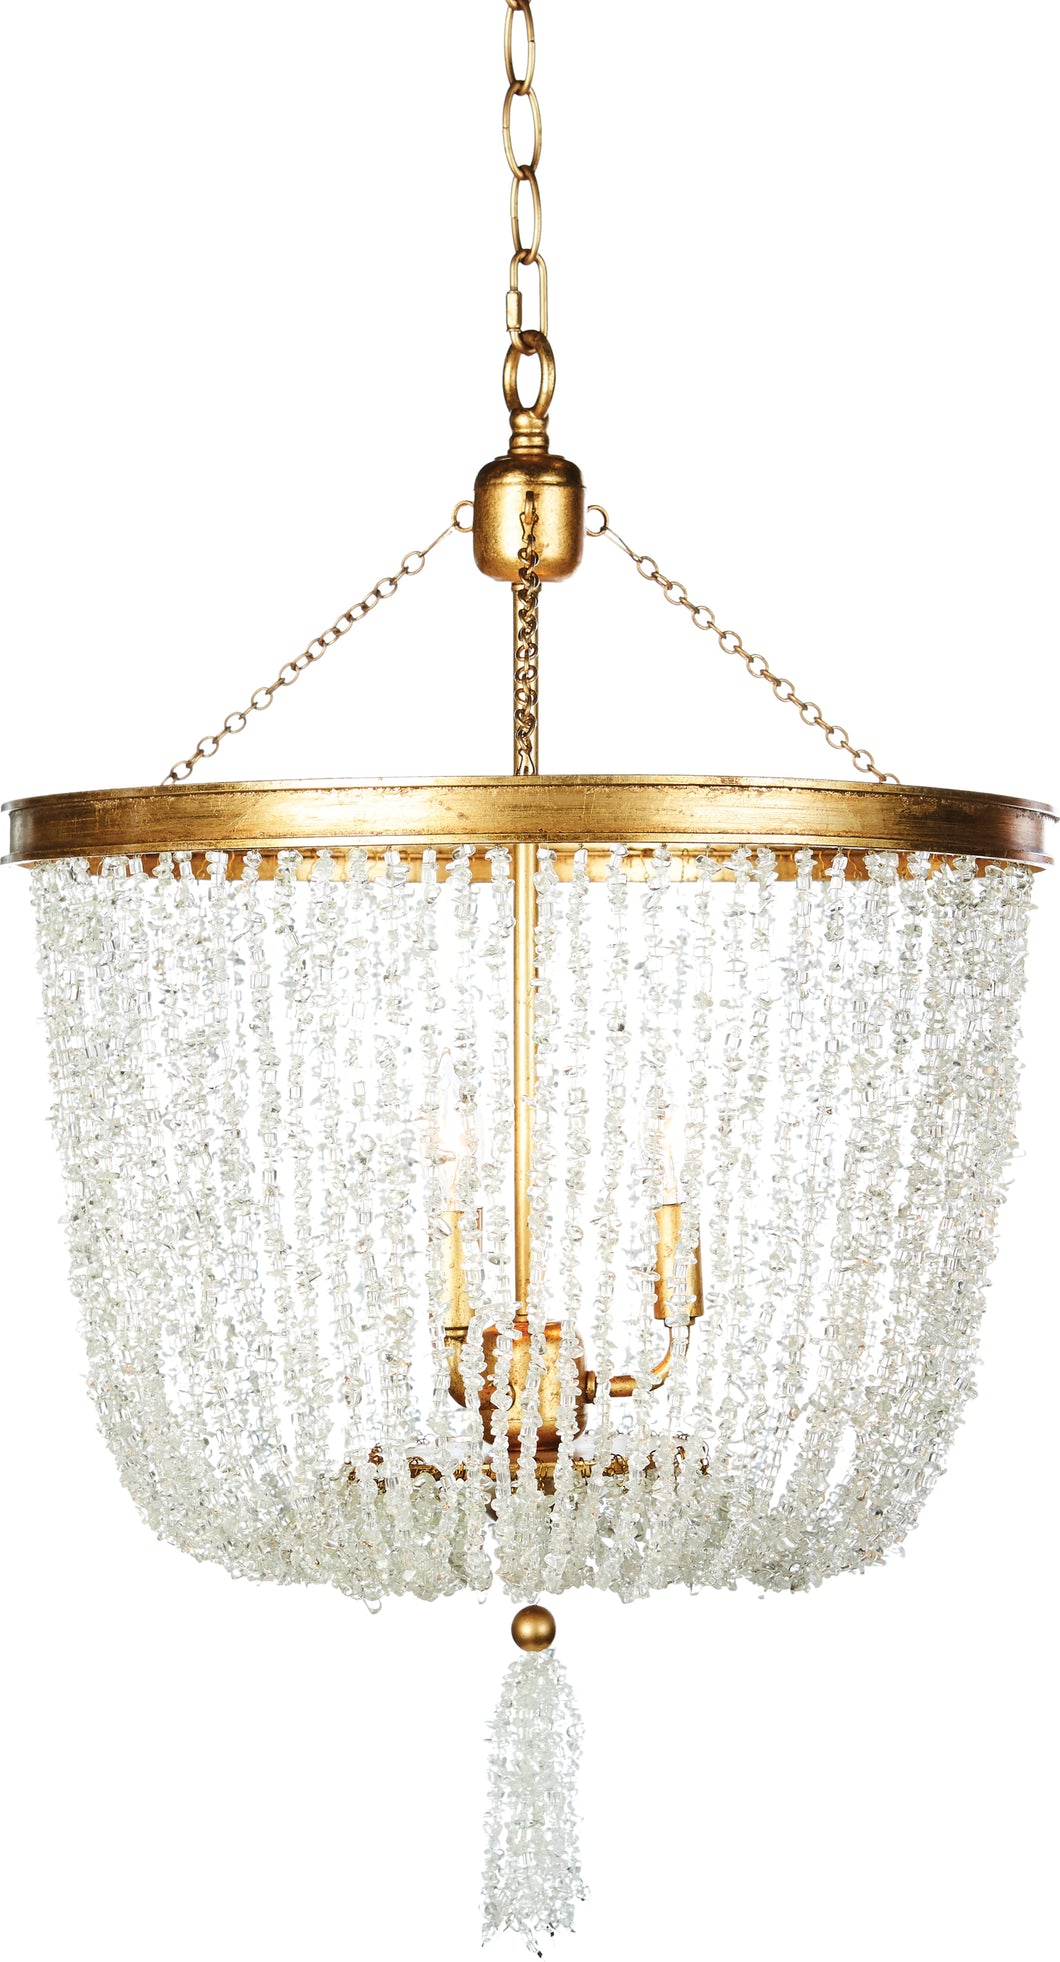 Stone River Crystal Chandelier